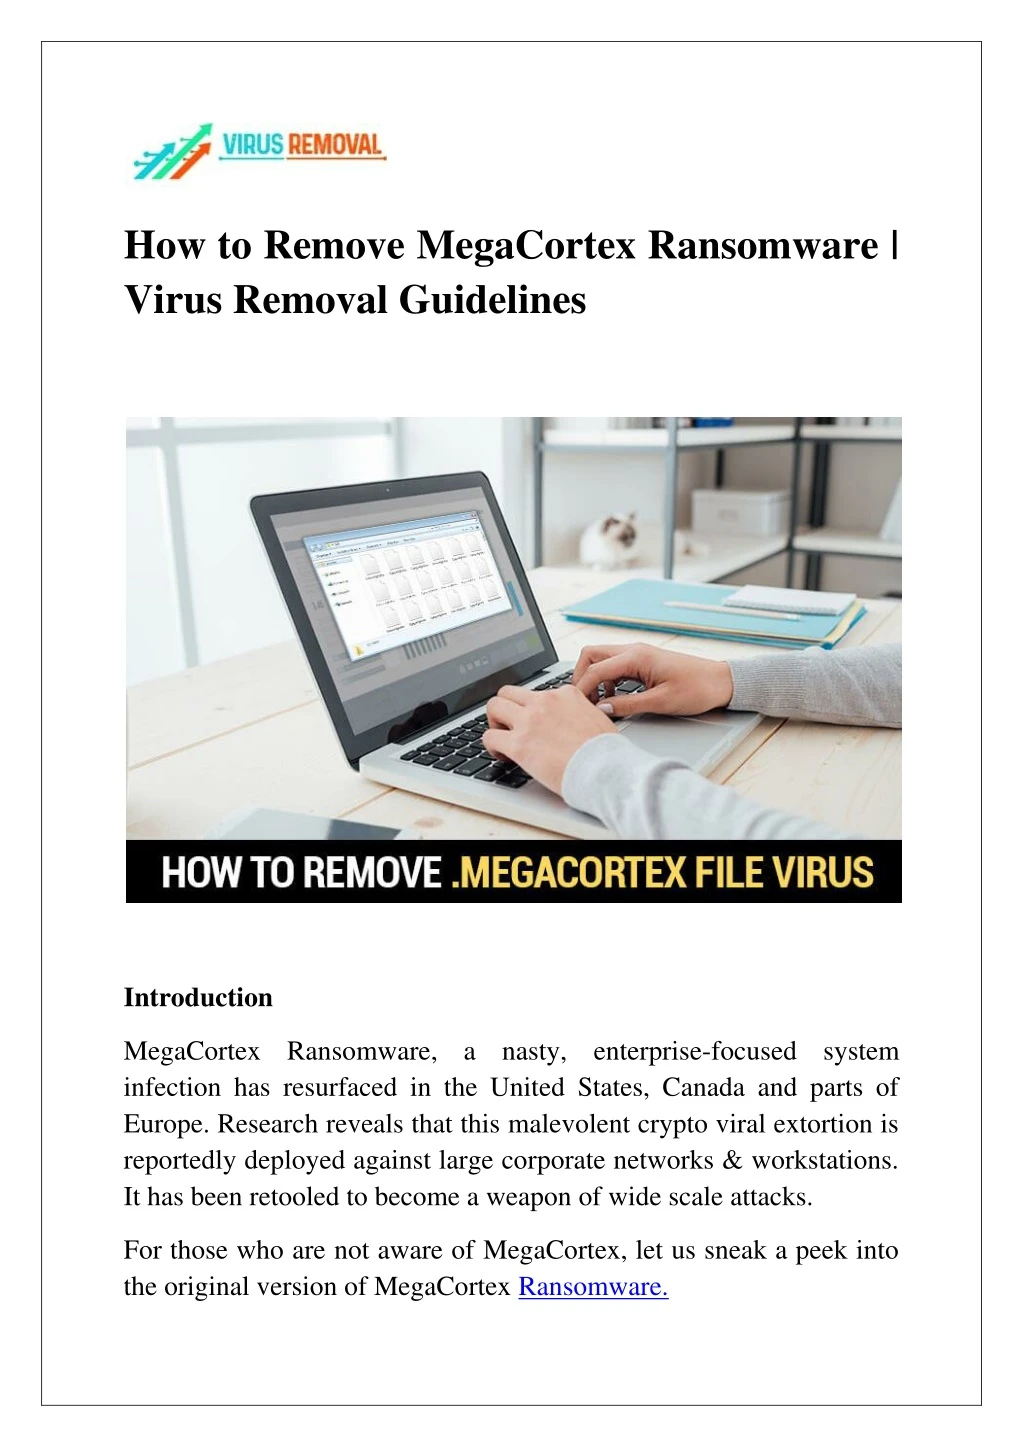 how to remove megacortex ransomware virus removal